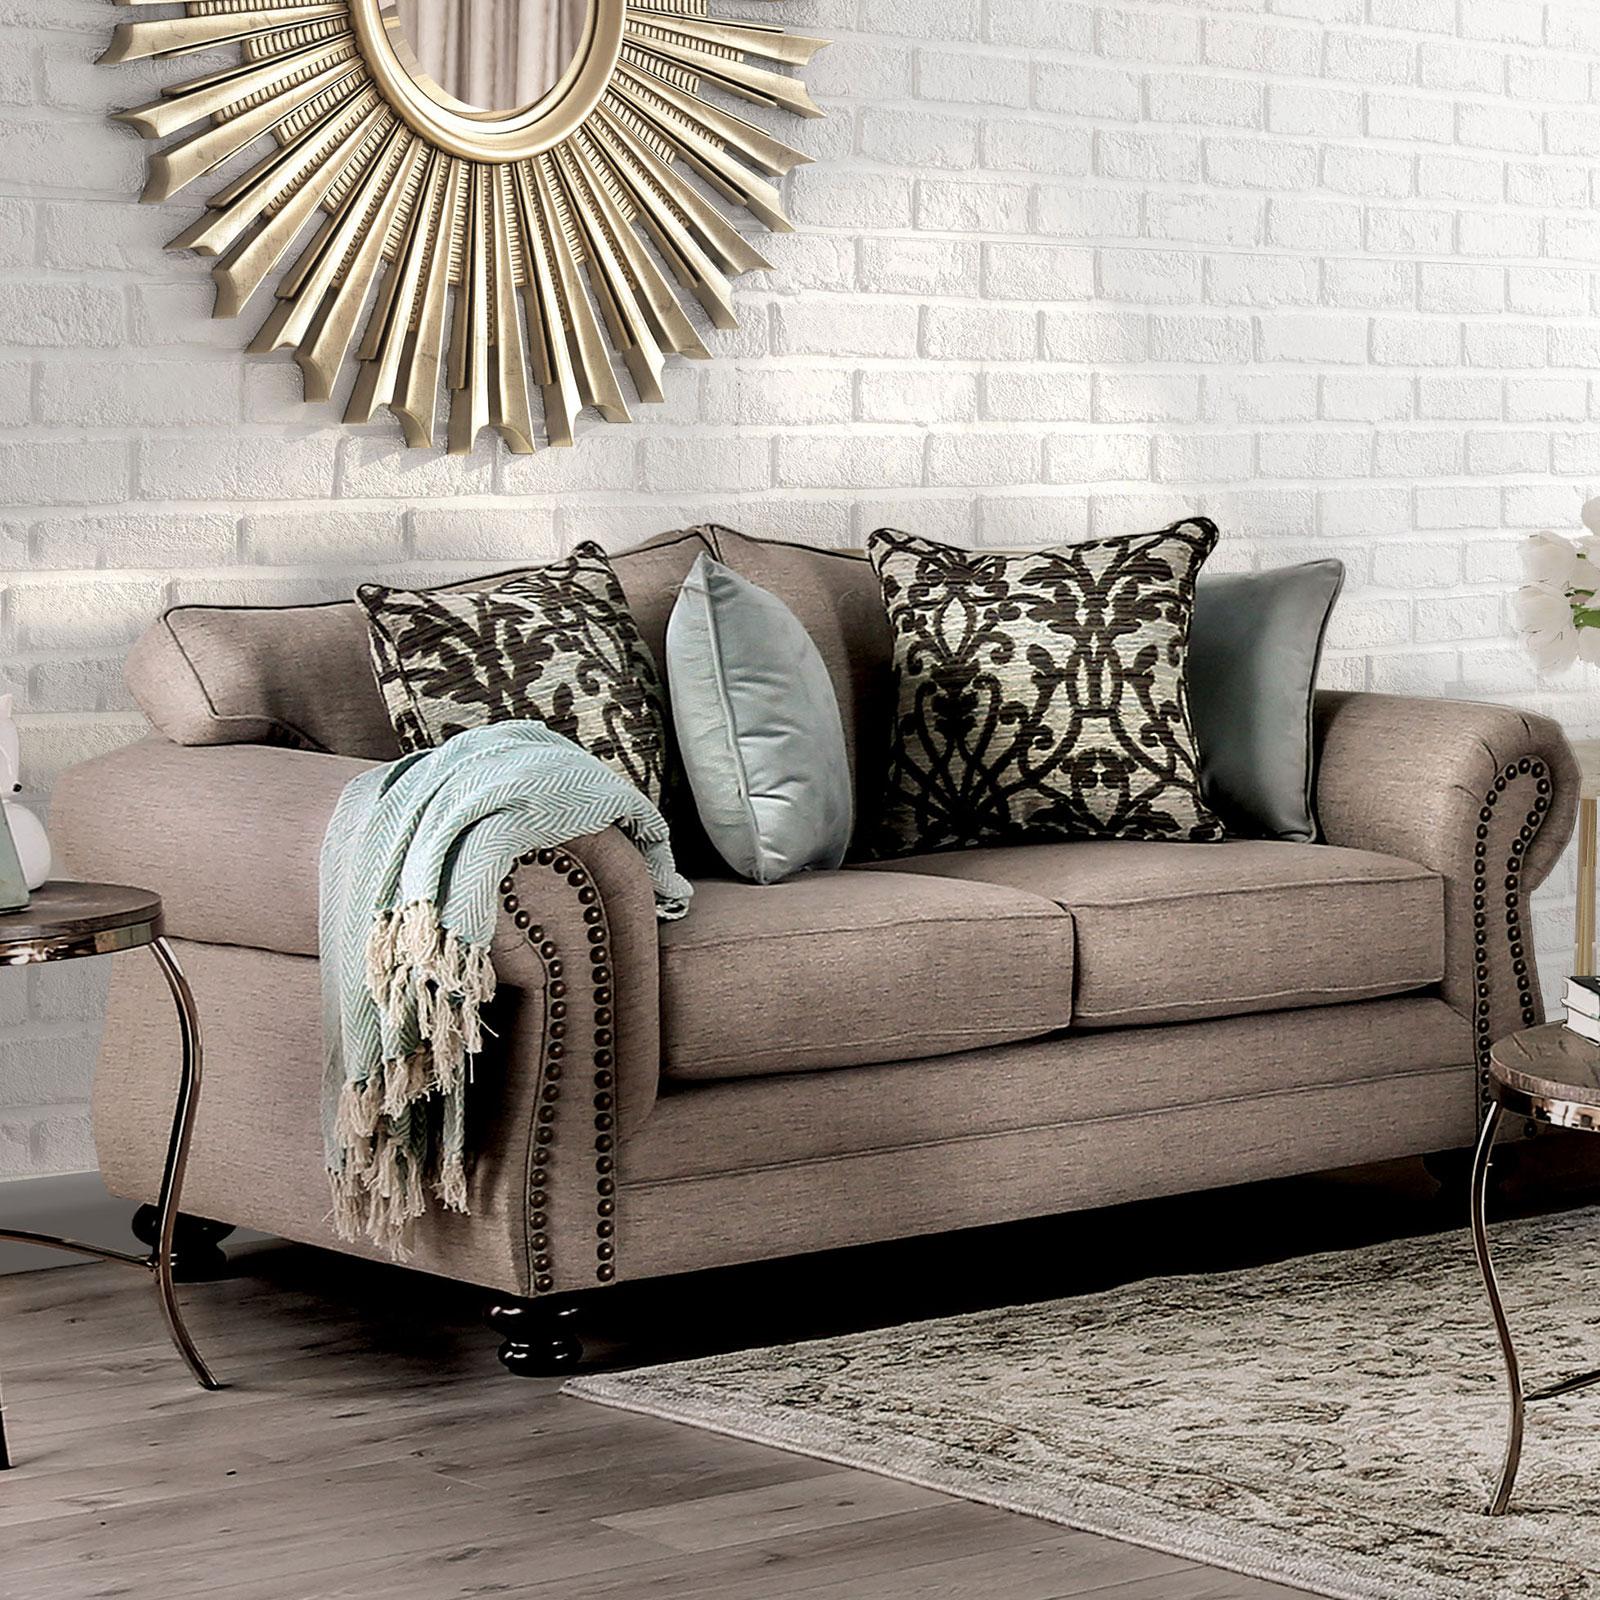 Transitional Loveseat JARAULD SM8006-LV SM8006-LV in Taupe Chenille